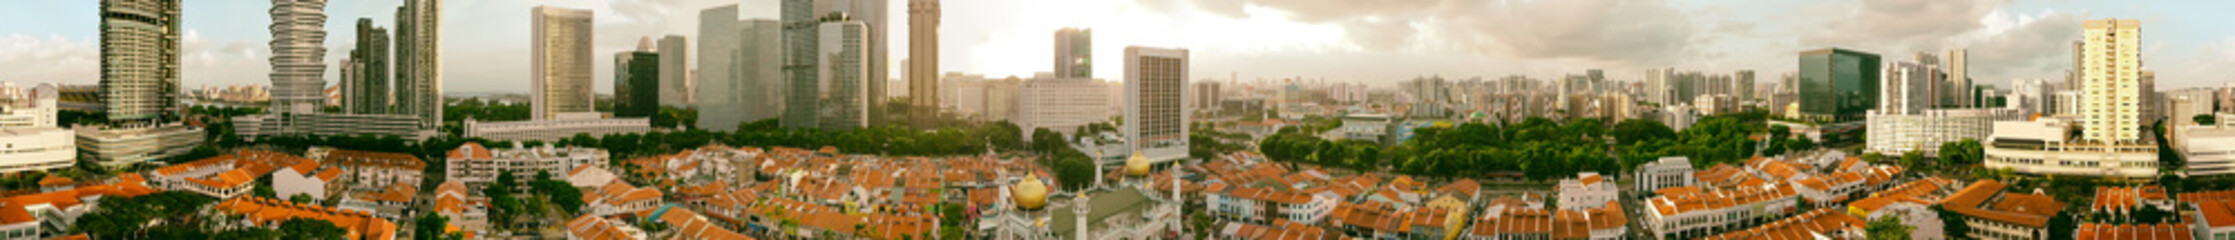 Singapore panoramic aerial view from Masjid Sultan Mosque in historic Kampong Glam